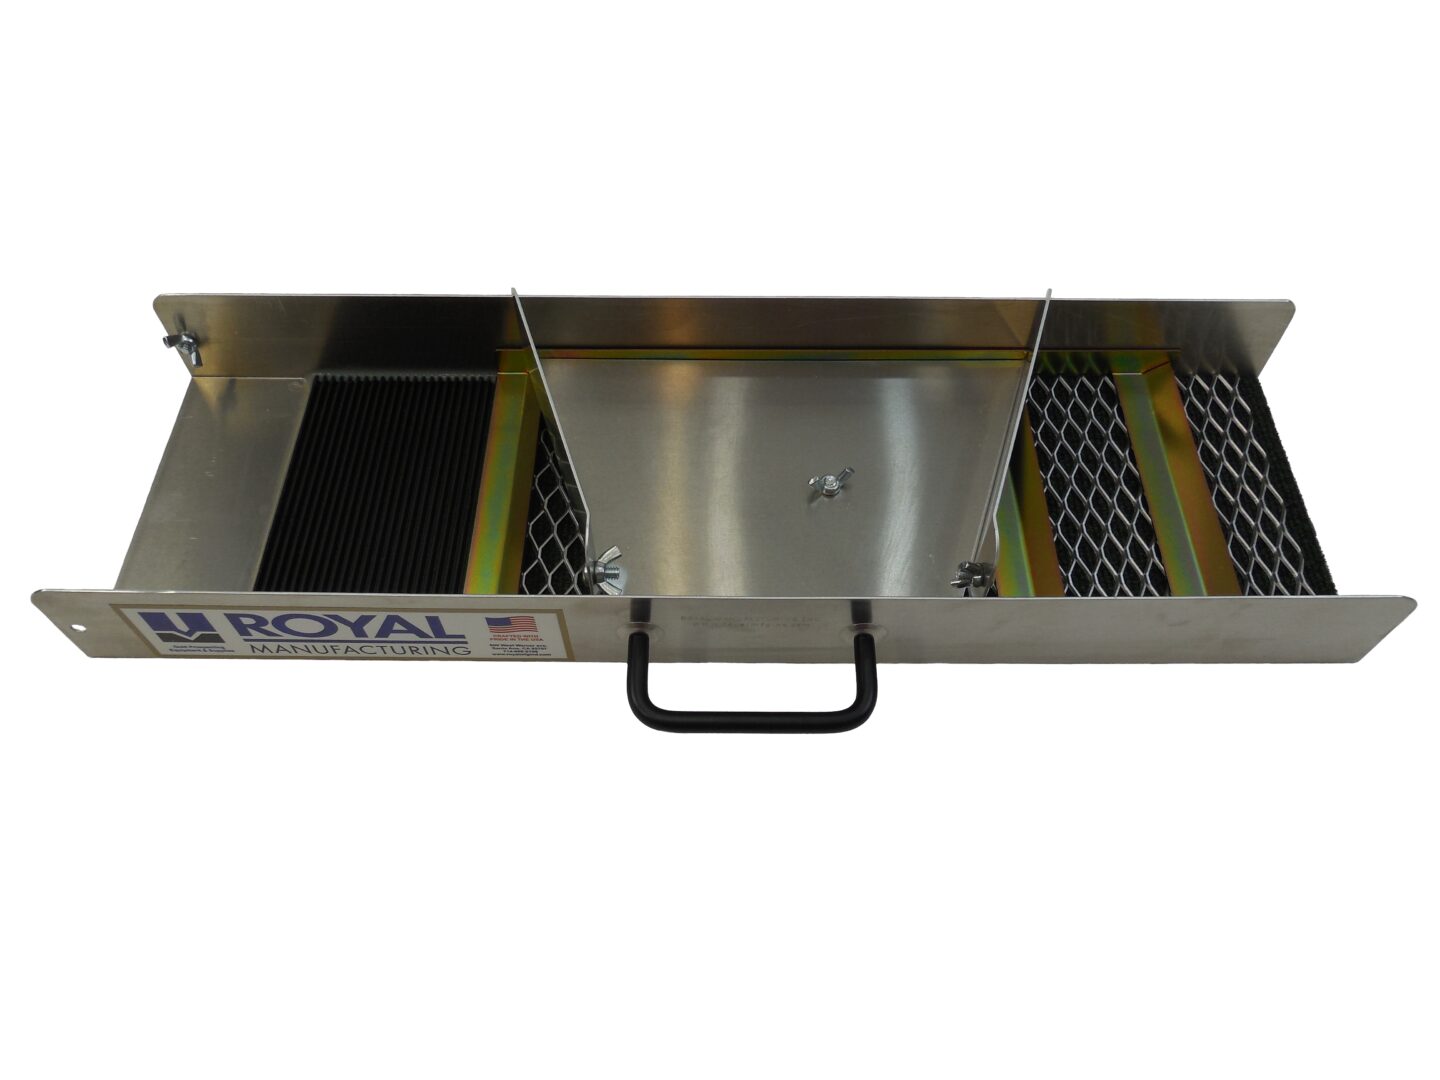 A Sluice Box 30 inch Compact 7 inch Wide with a handle on it.